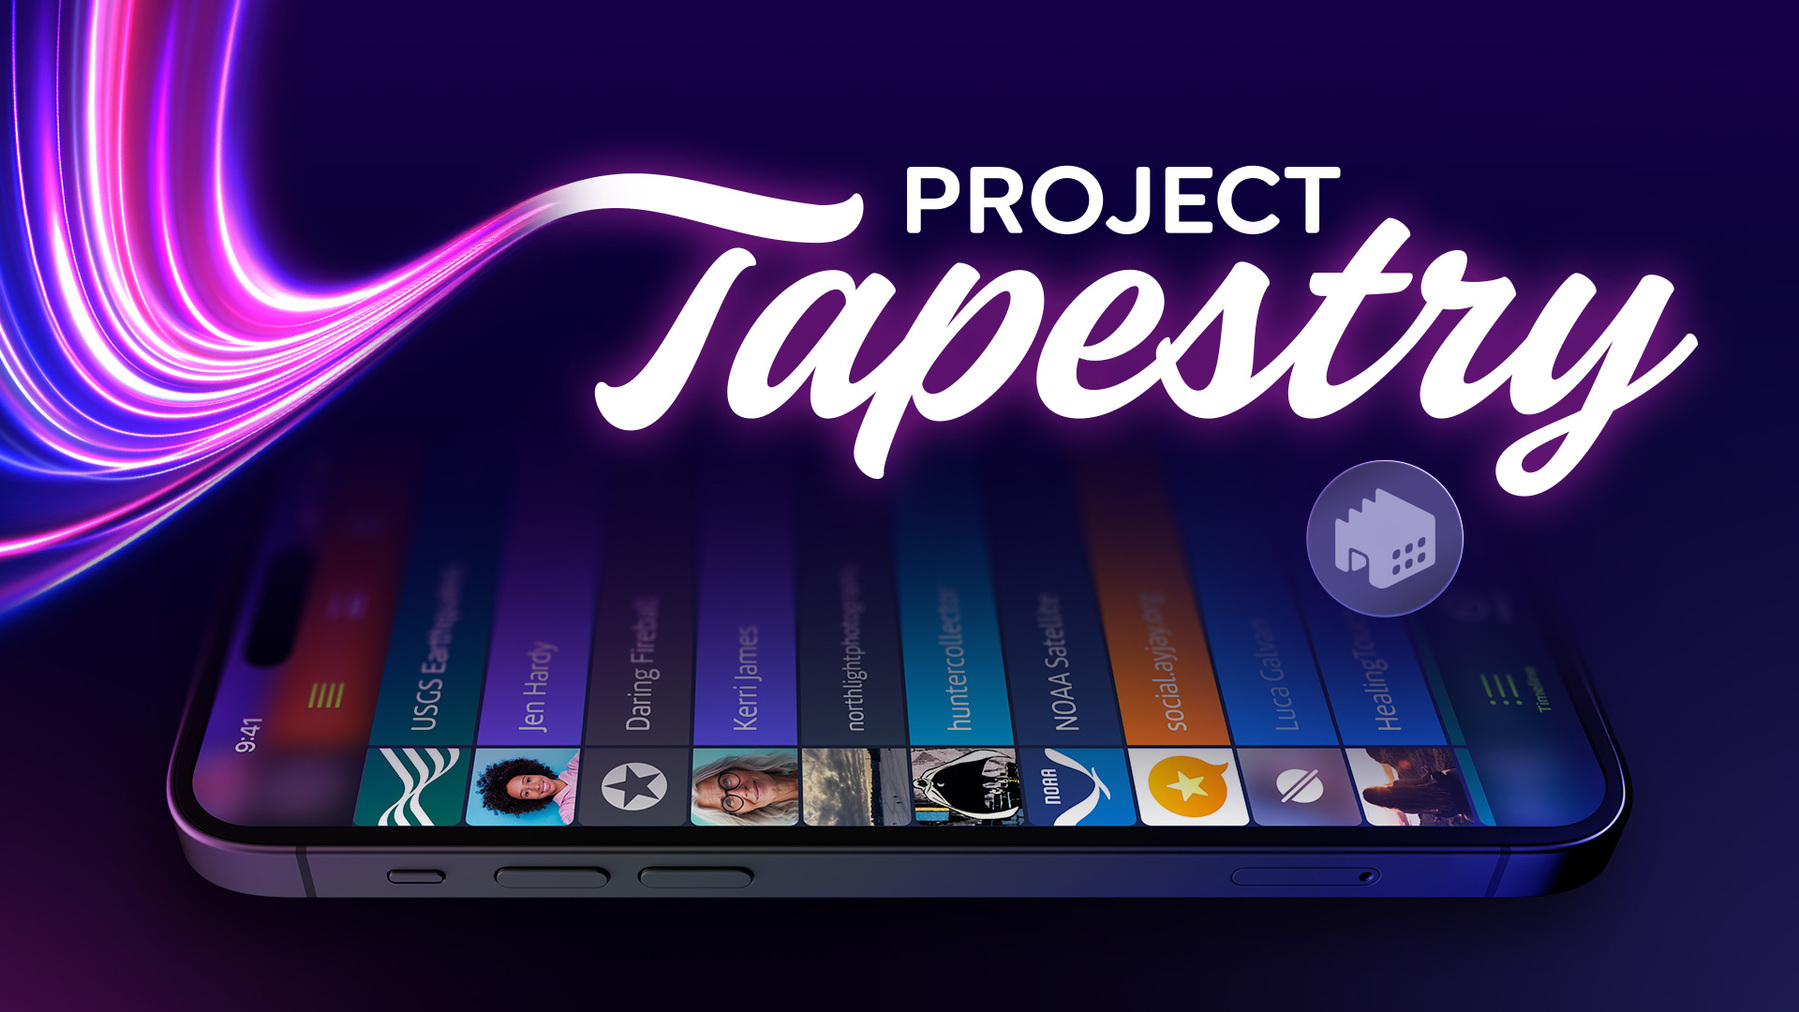 iPhone laying on surface displaying colorful graphic interface titled PROJECT Tapestry with abstract purple light swirls in the background.